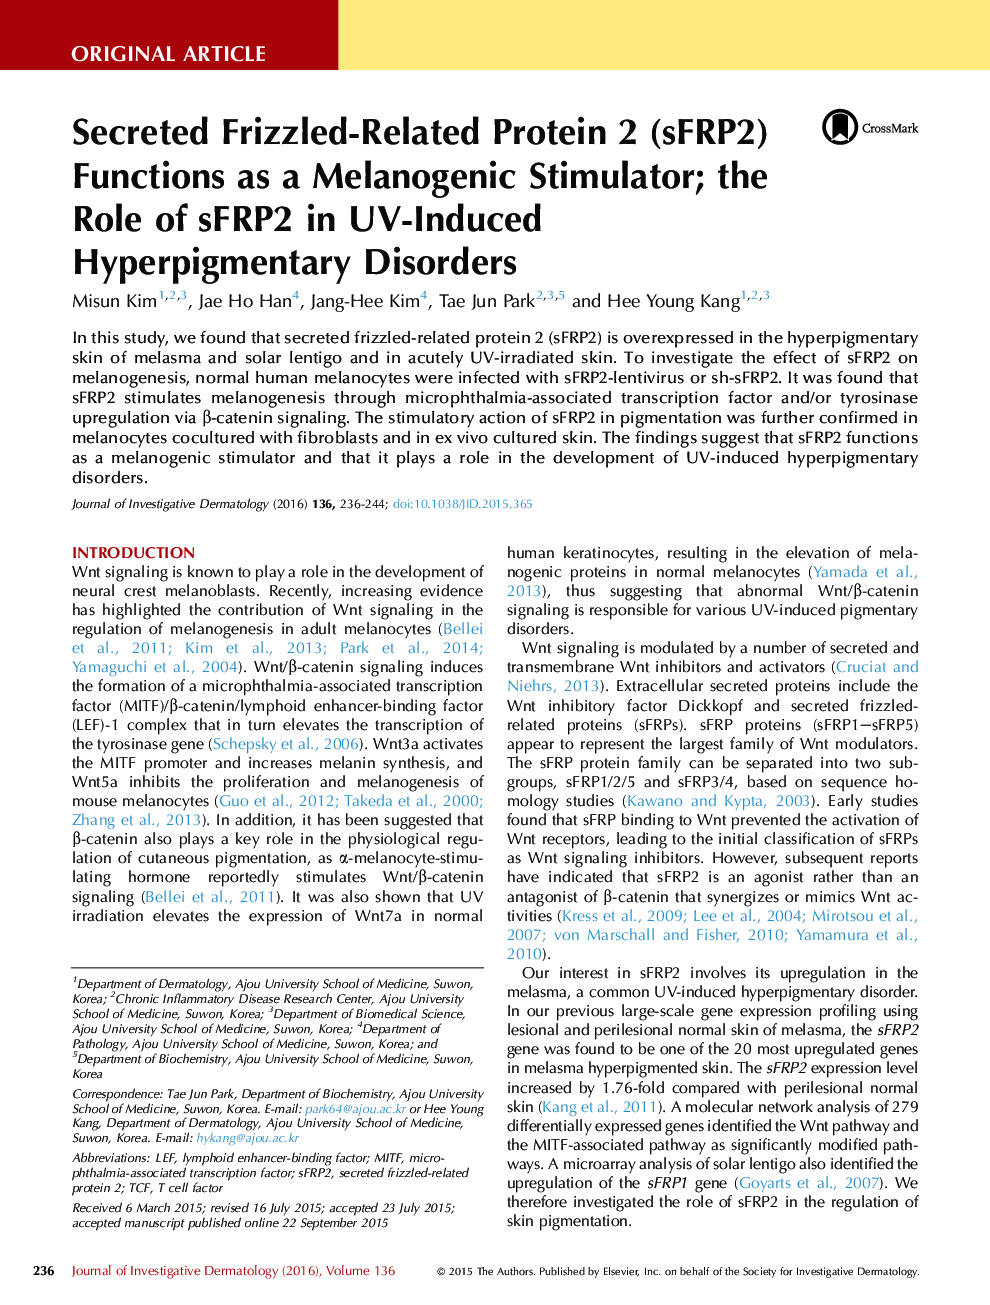 Secreted Frizzled-Related Protein 2 (sFRP2) Functions as a Melanogenic Stimulator; the Role of sFRP2 in UV-Induced Hyperpigmentary Disorders